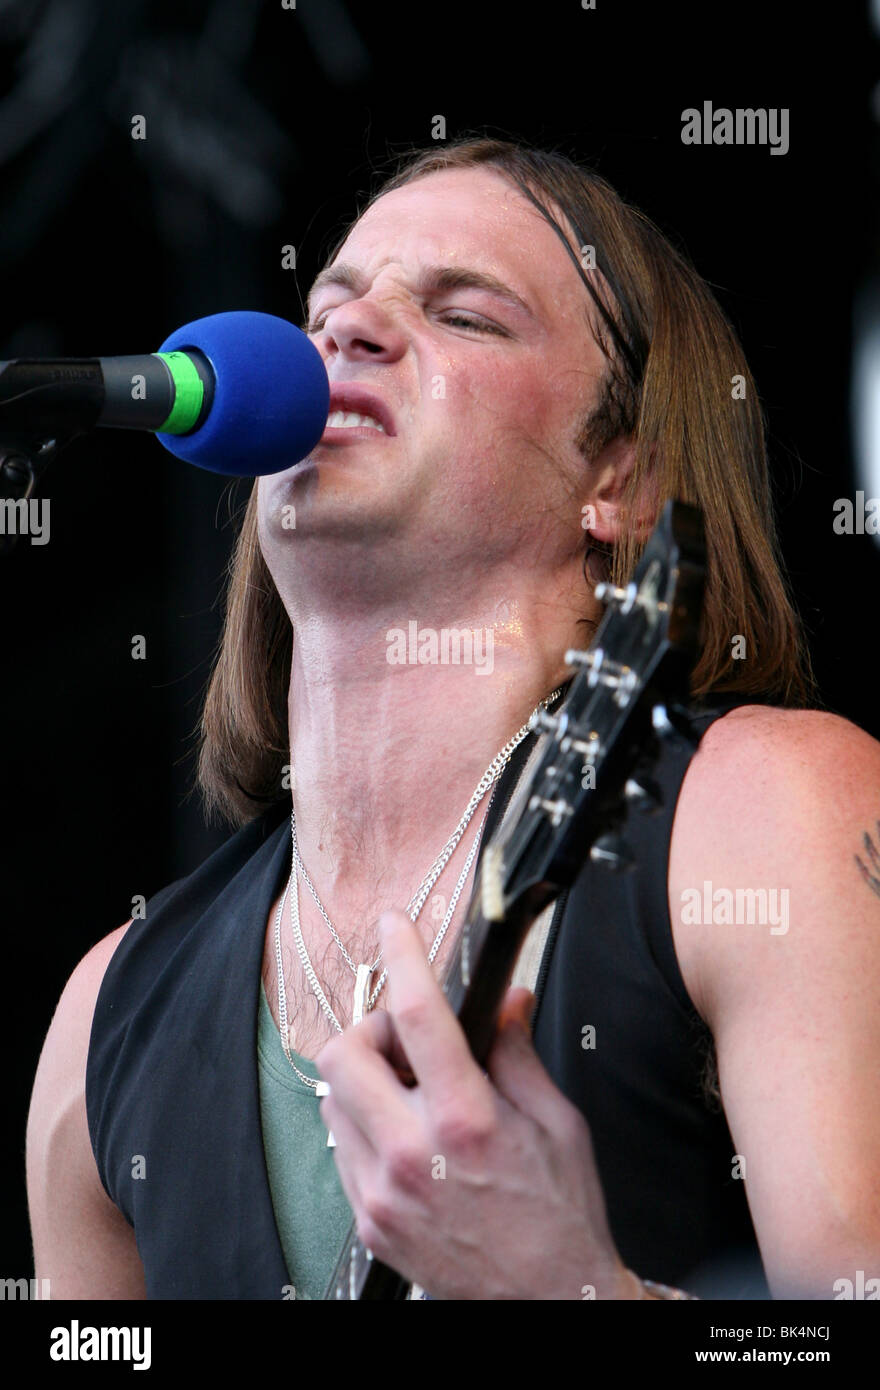 Caleb Bollowill of Kings of Leon performs during a concert. Stock Photo